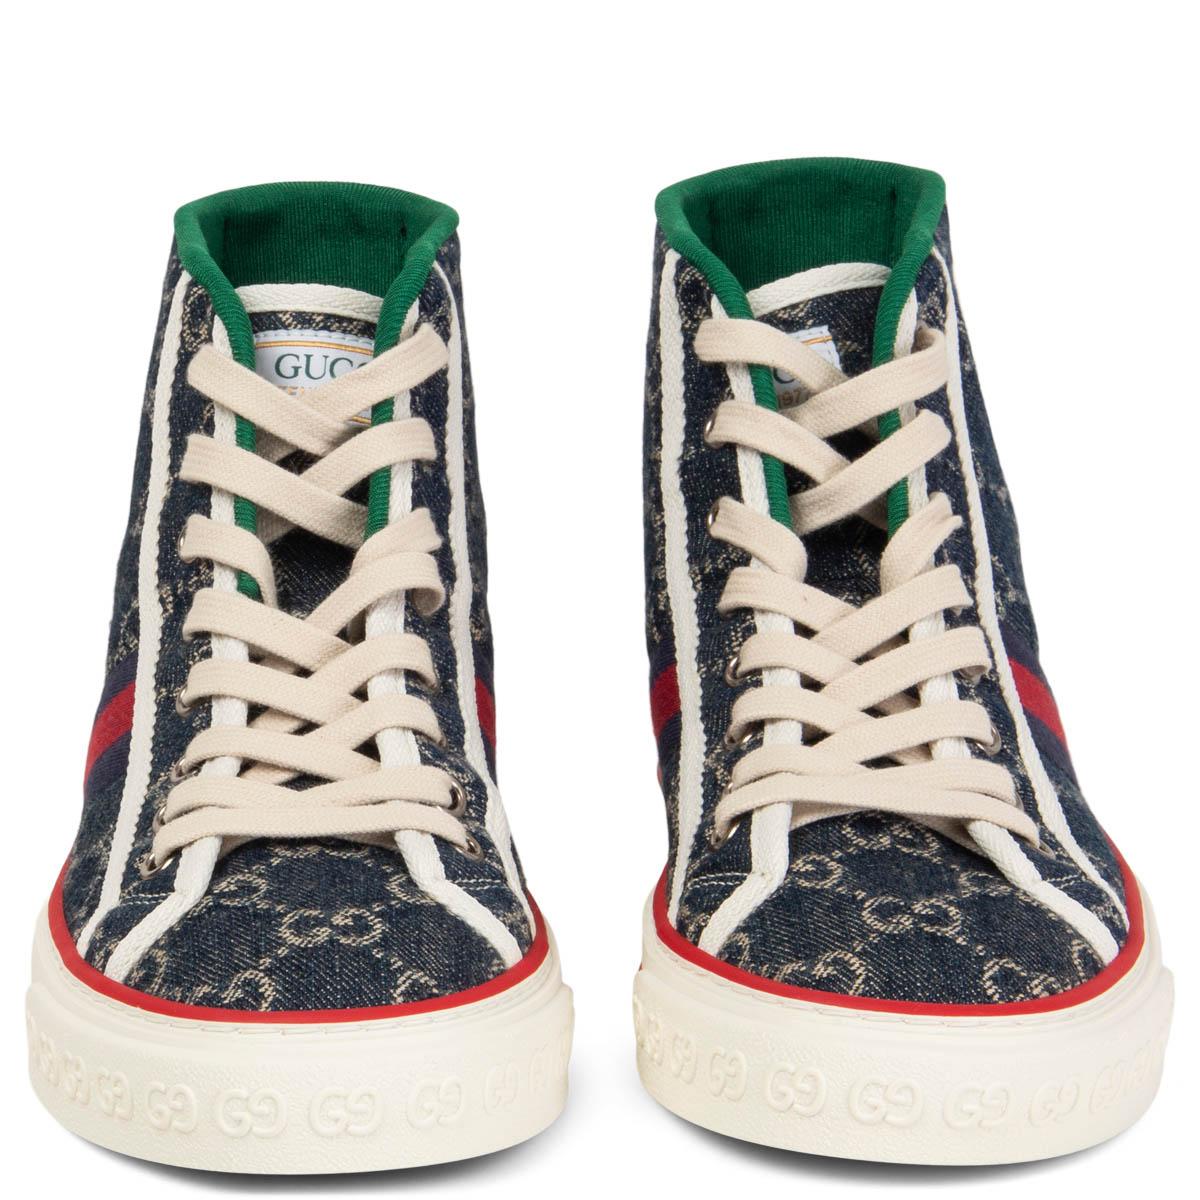 100% authentic Gucci Tennis 1977 high-top sneakers crafted from navy blue organic jacquard denim. With an allover GG motif and signature red/blue Web stripe on the side. Brand new. Come with dust bag. 

Measurements
Imprinted Size	37.5
Shoe